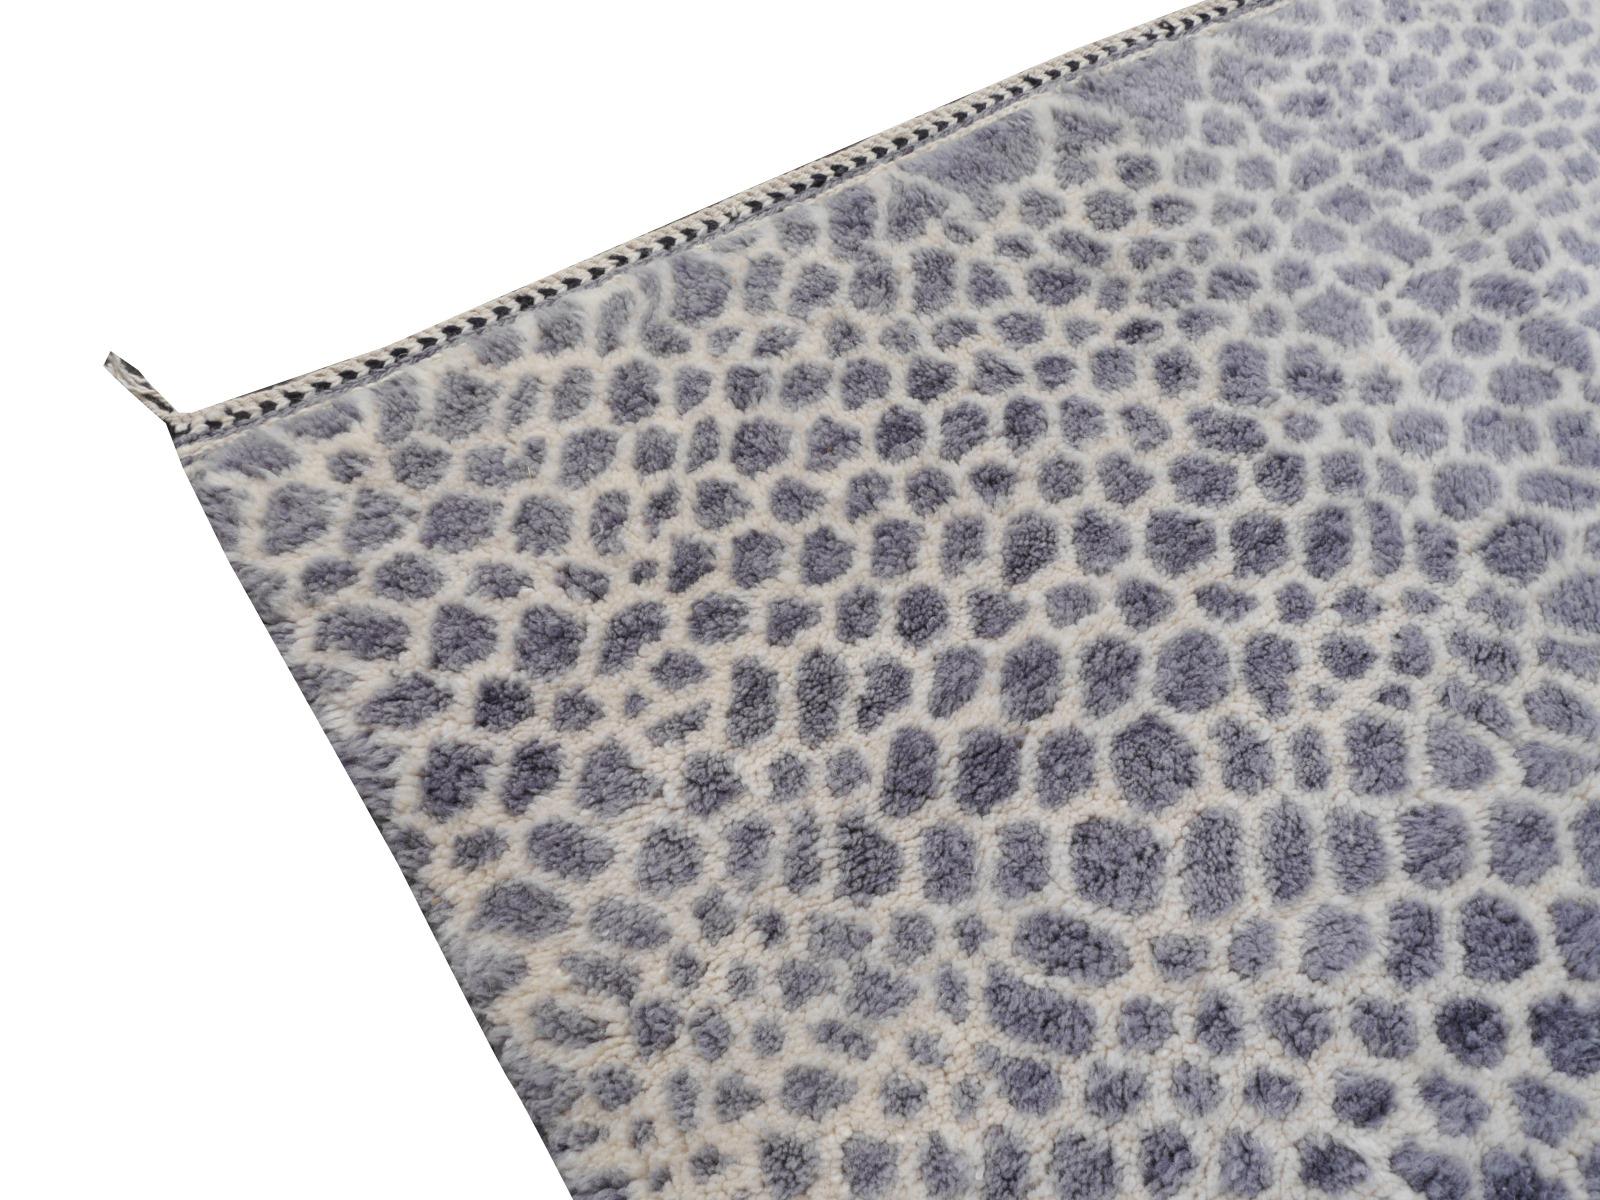 North African Moroccan Berber Rug Leopard Cheetah Design Soft Quality Gray Beige For Sale 5